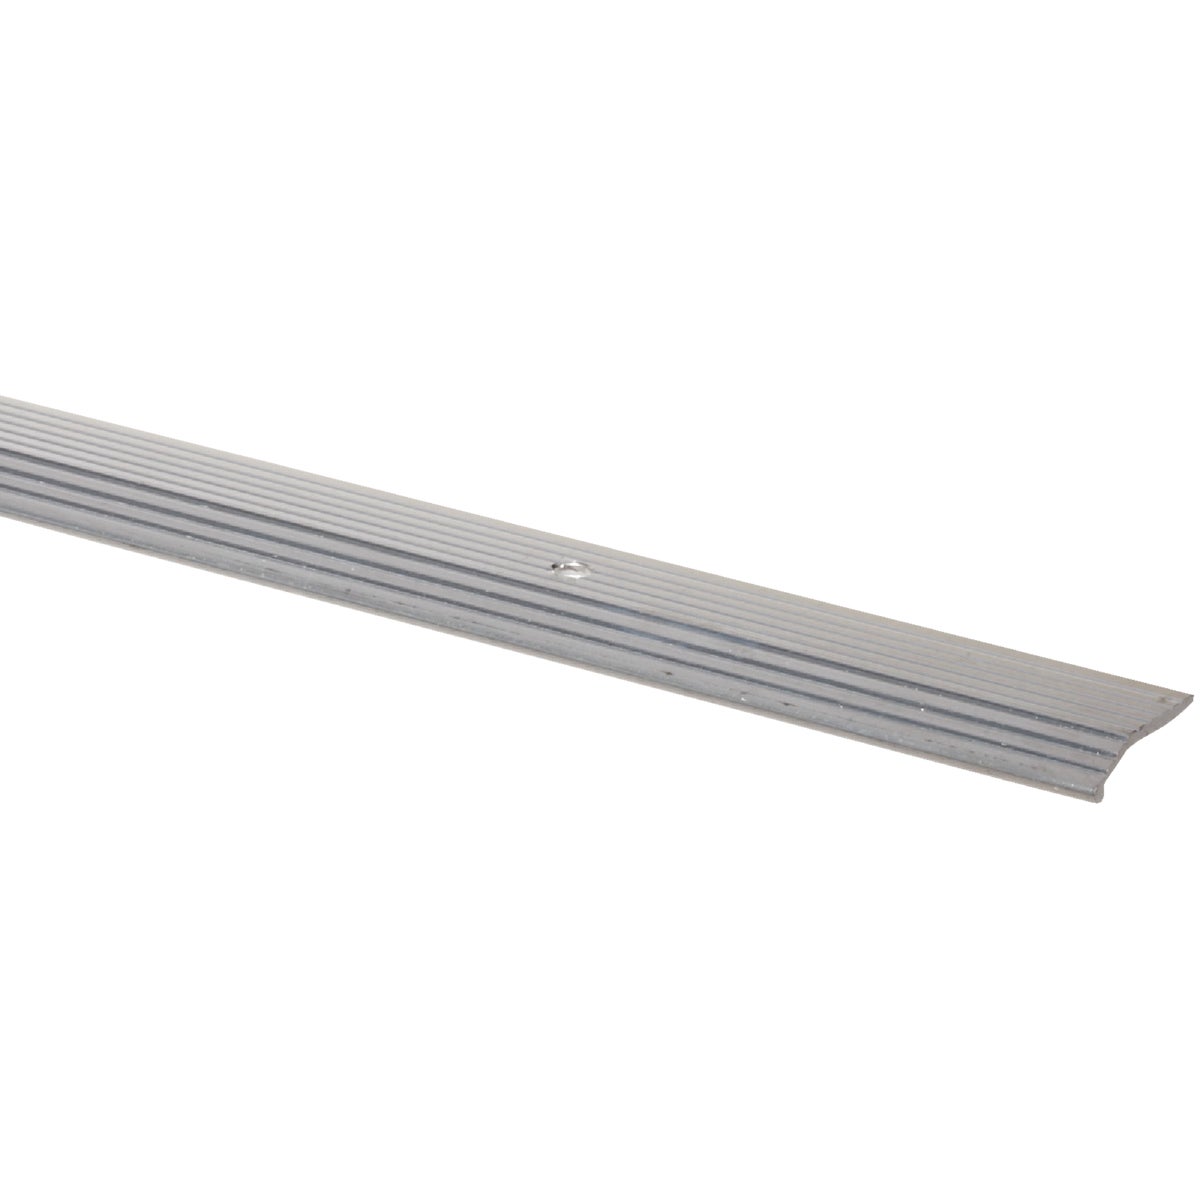 M-D Building Products 3/4 In. x 3 Ft. Satin Silver Aluminum Fluted Tile Edging